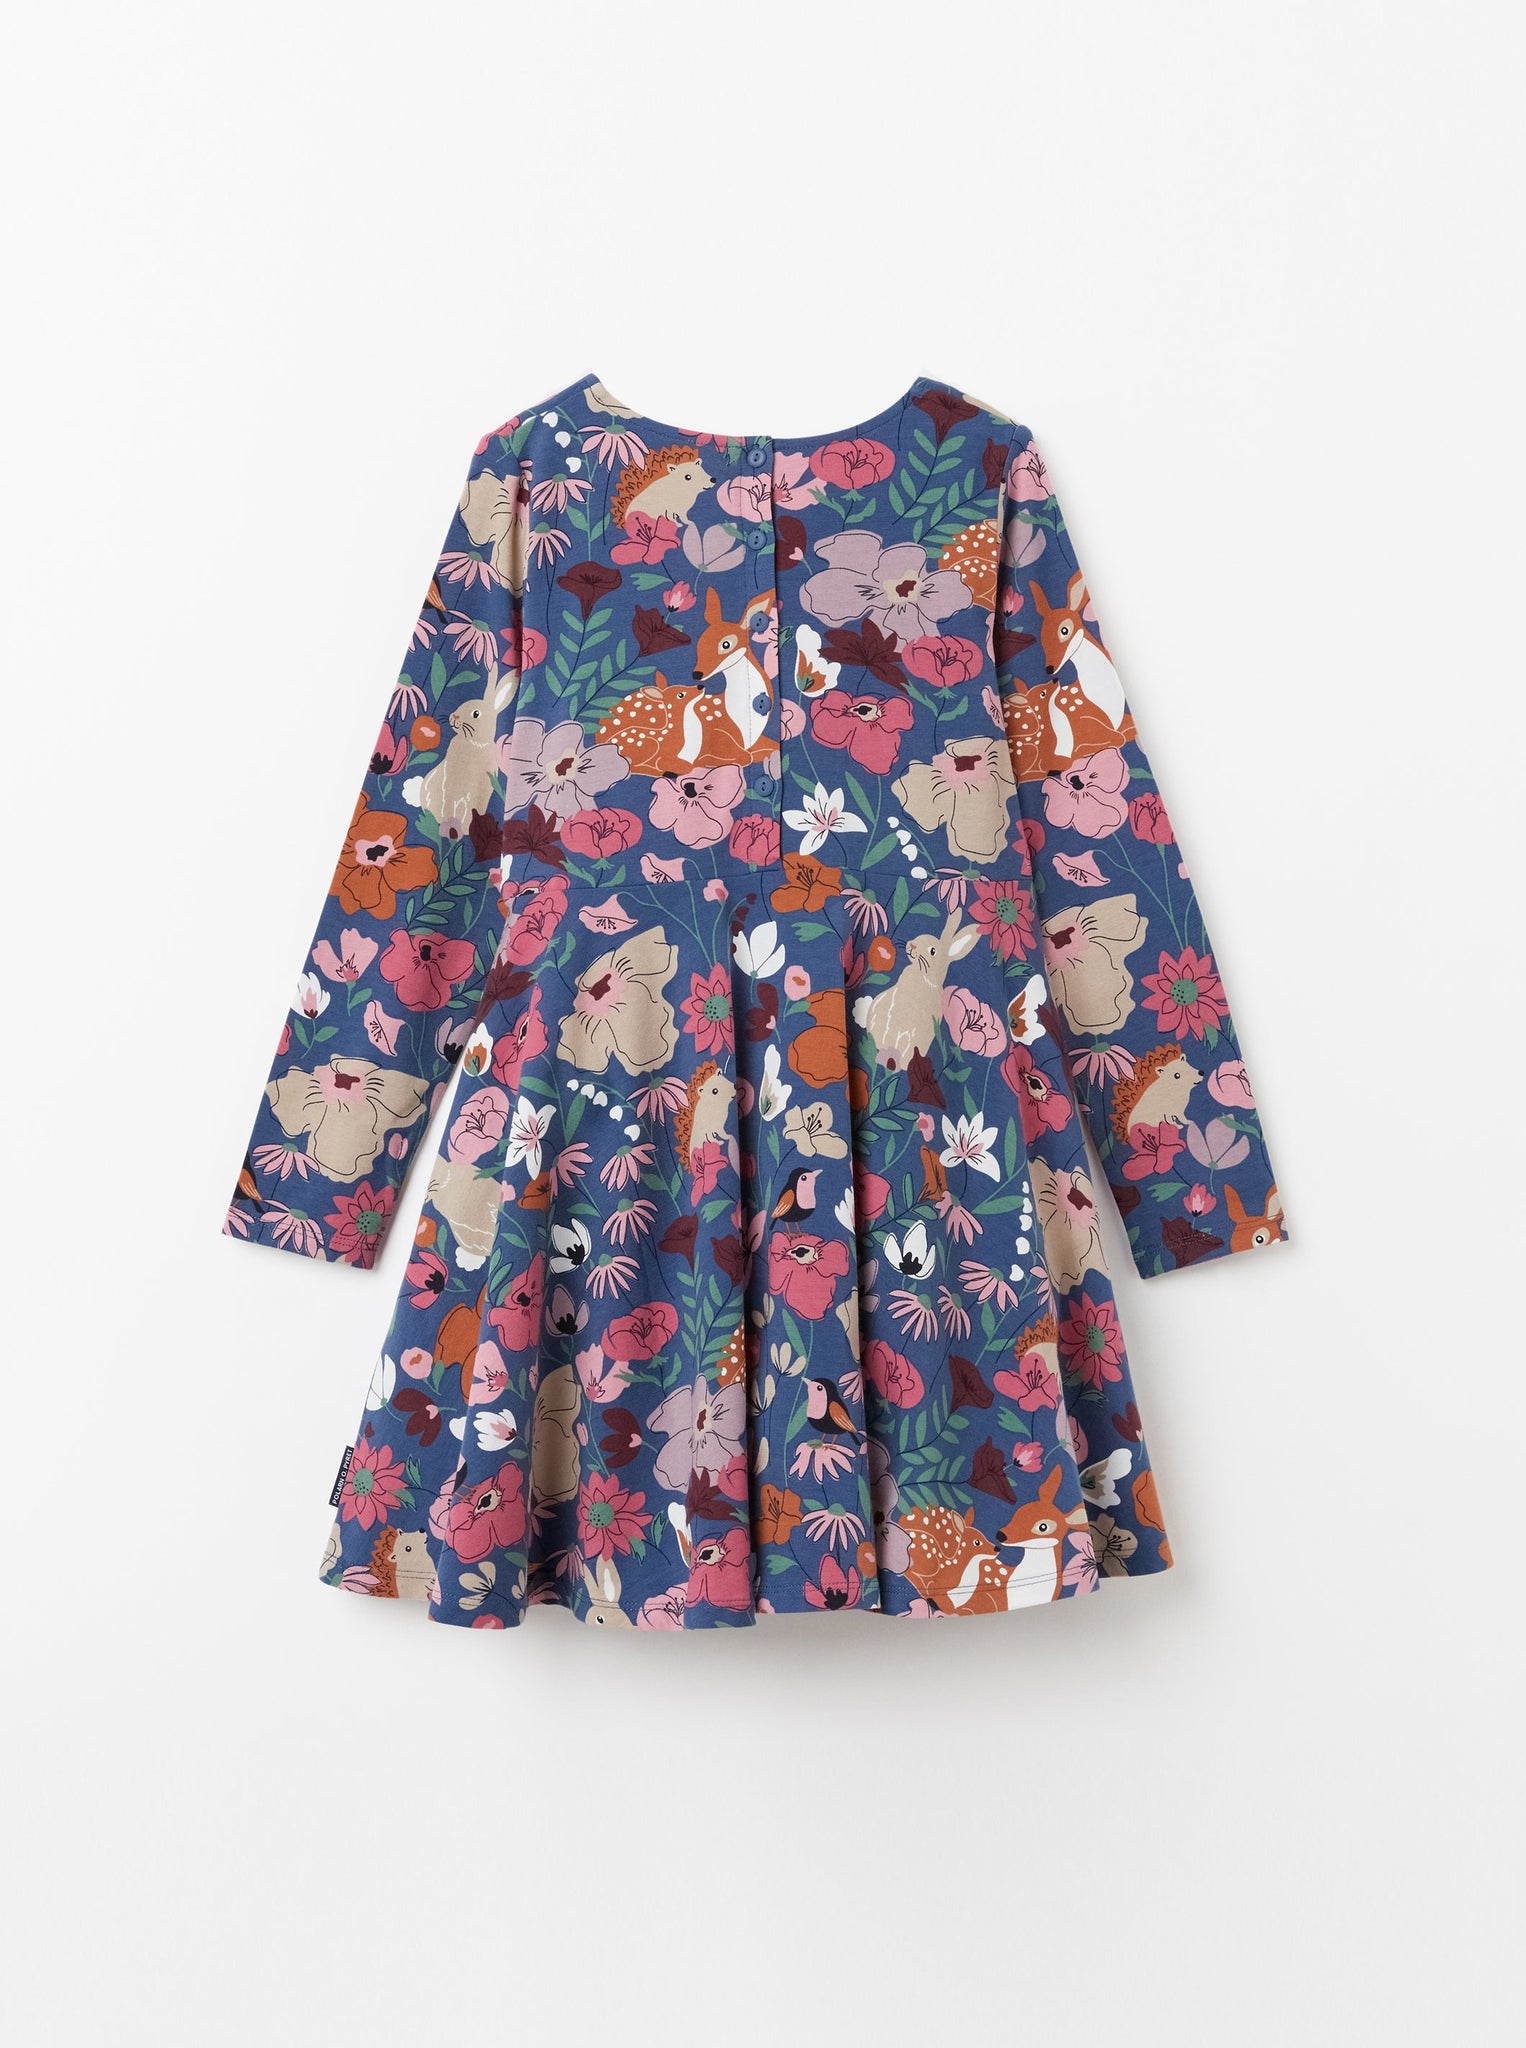 Organic Cotton Blue Floral Kids Dress from the Polarn O. Pyret Kidswear collection. The best ethical kids clothes